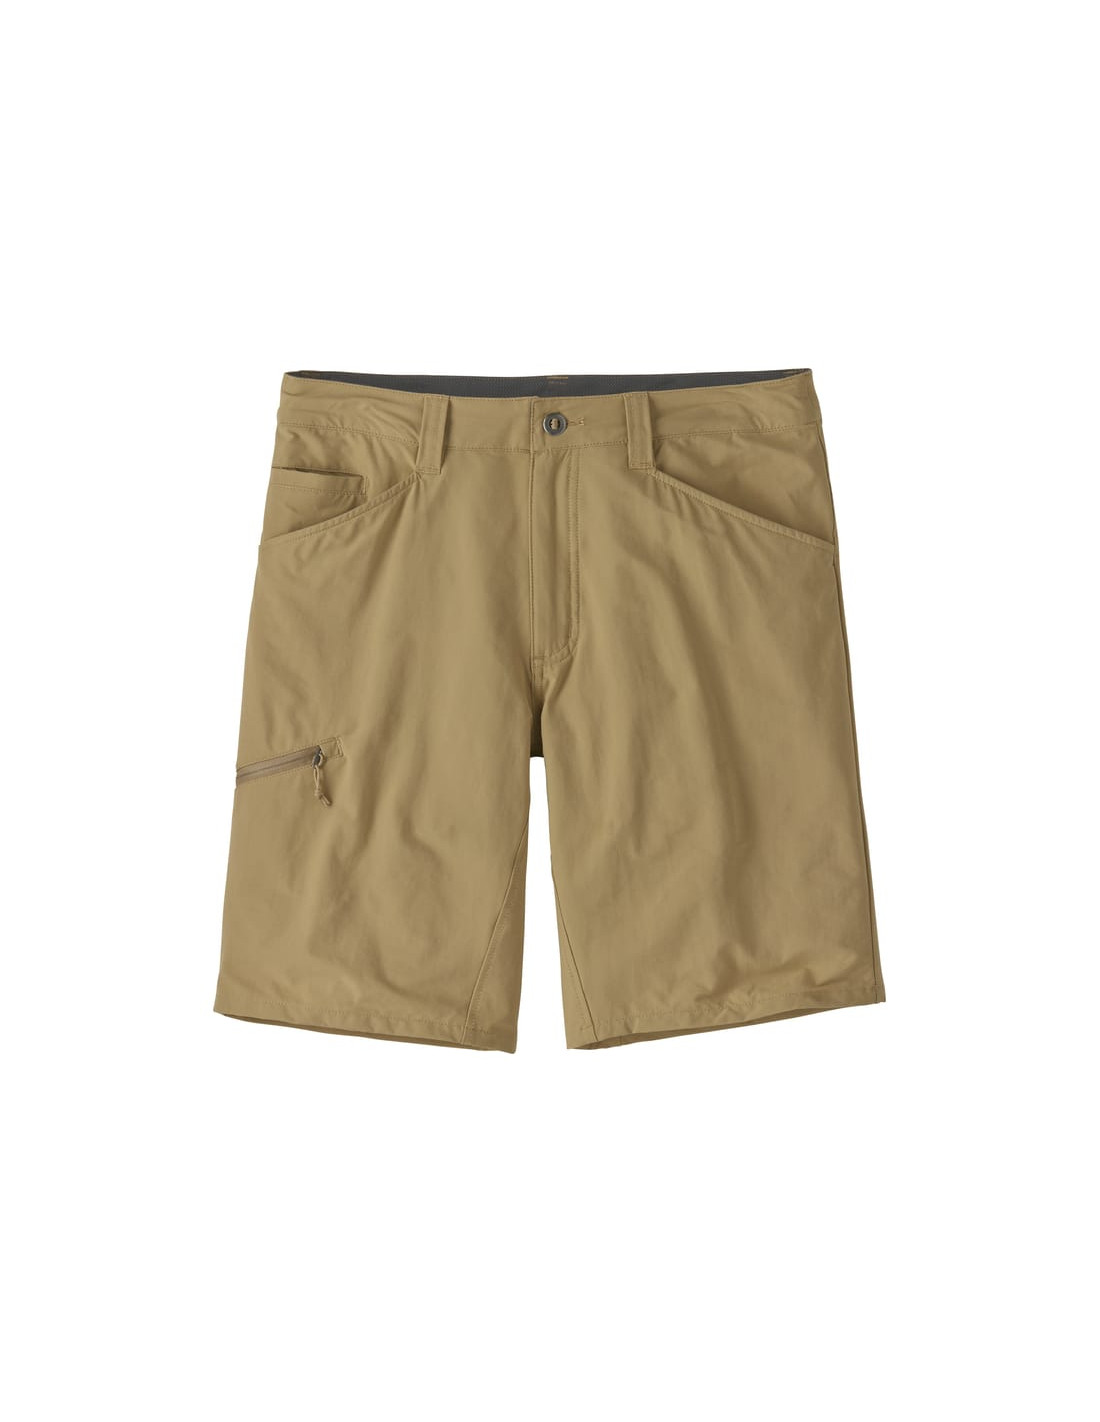 M'S QUANDARY SHORTS - 10 IN.